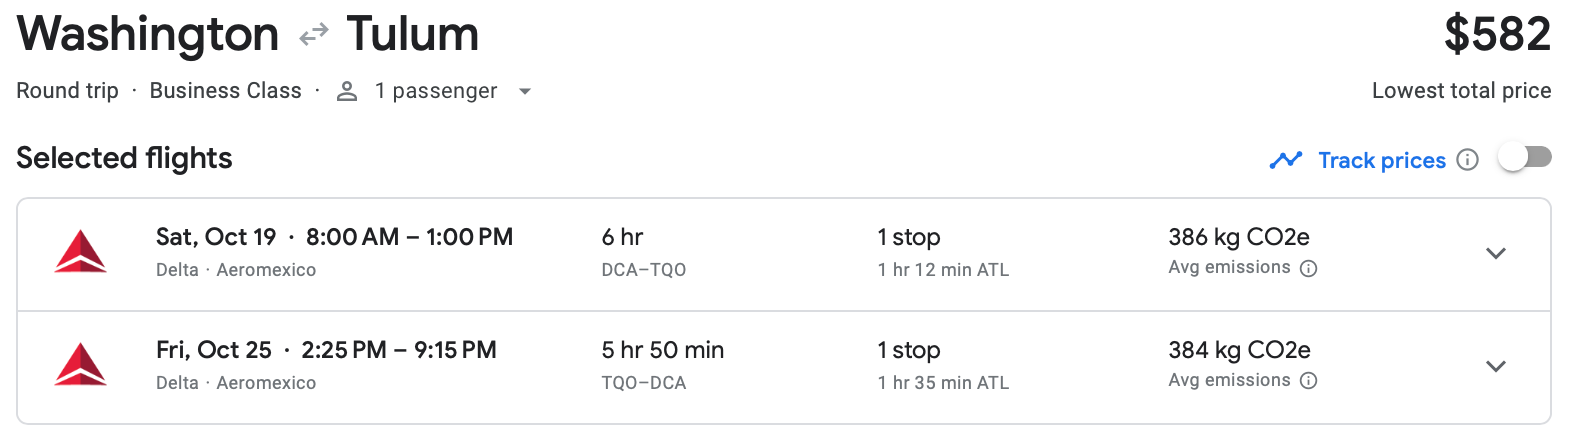 A screenshot of the Google Flights estimate for a round-trip, business class flight from Washington, D.C. to Tulum.